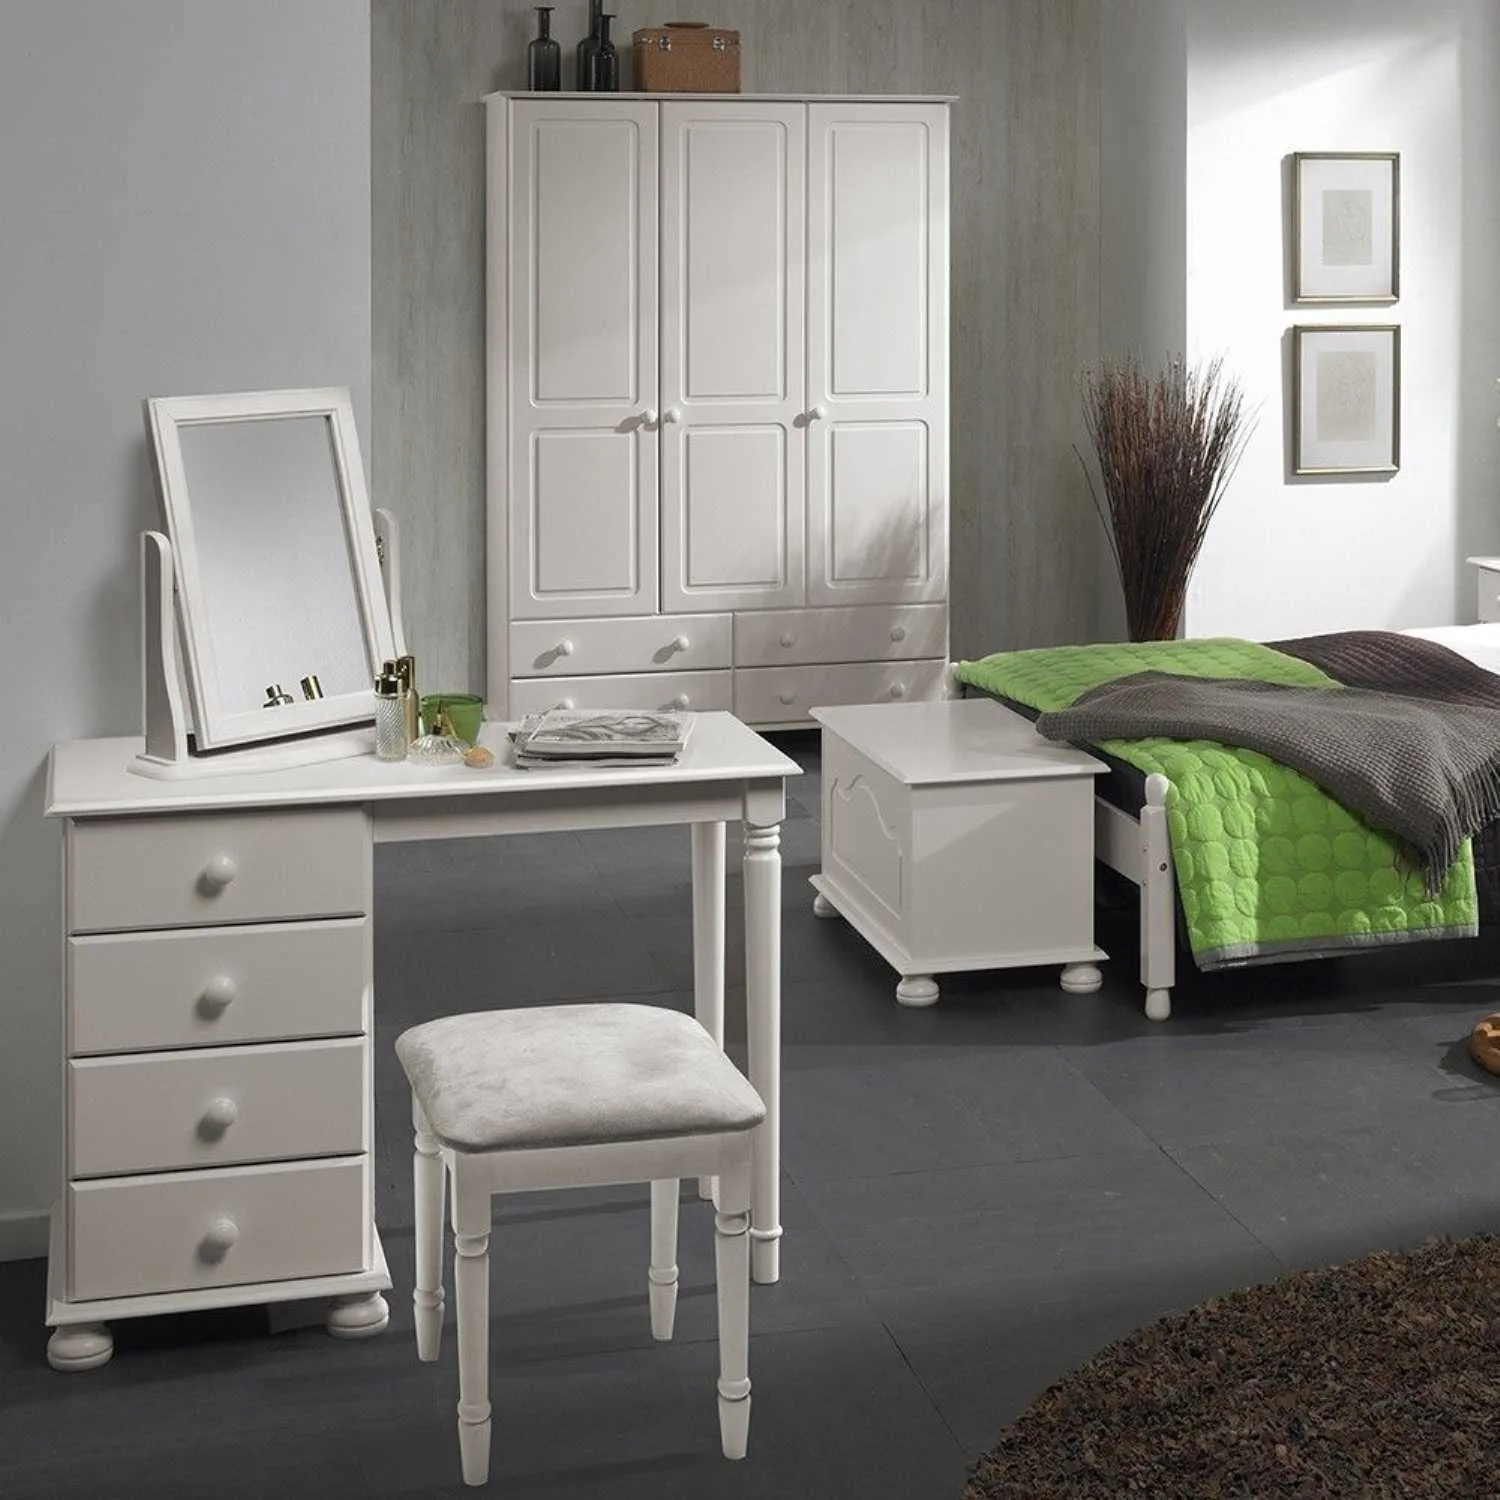 Traditional White 4 Drawer Dressing Table With White Wooden Handles